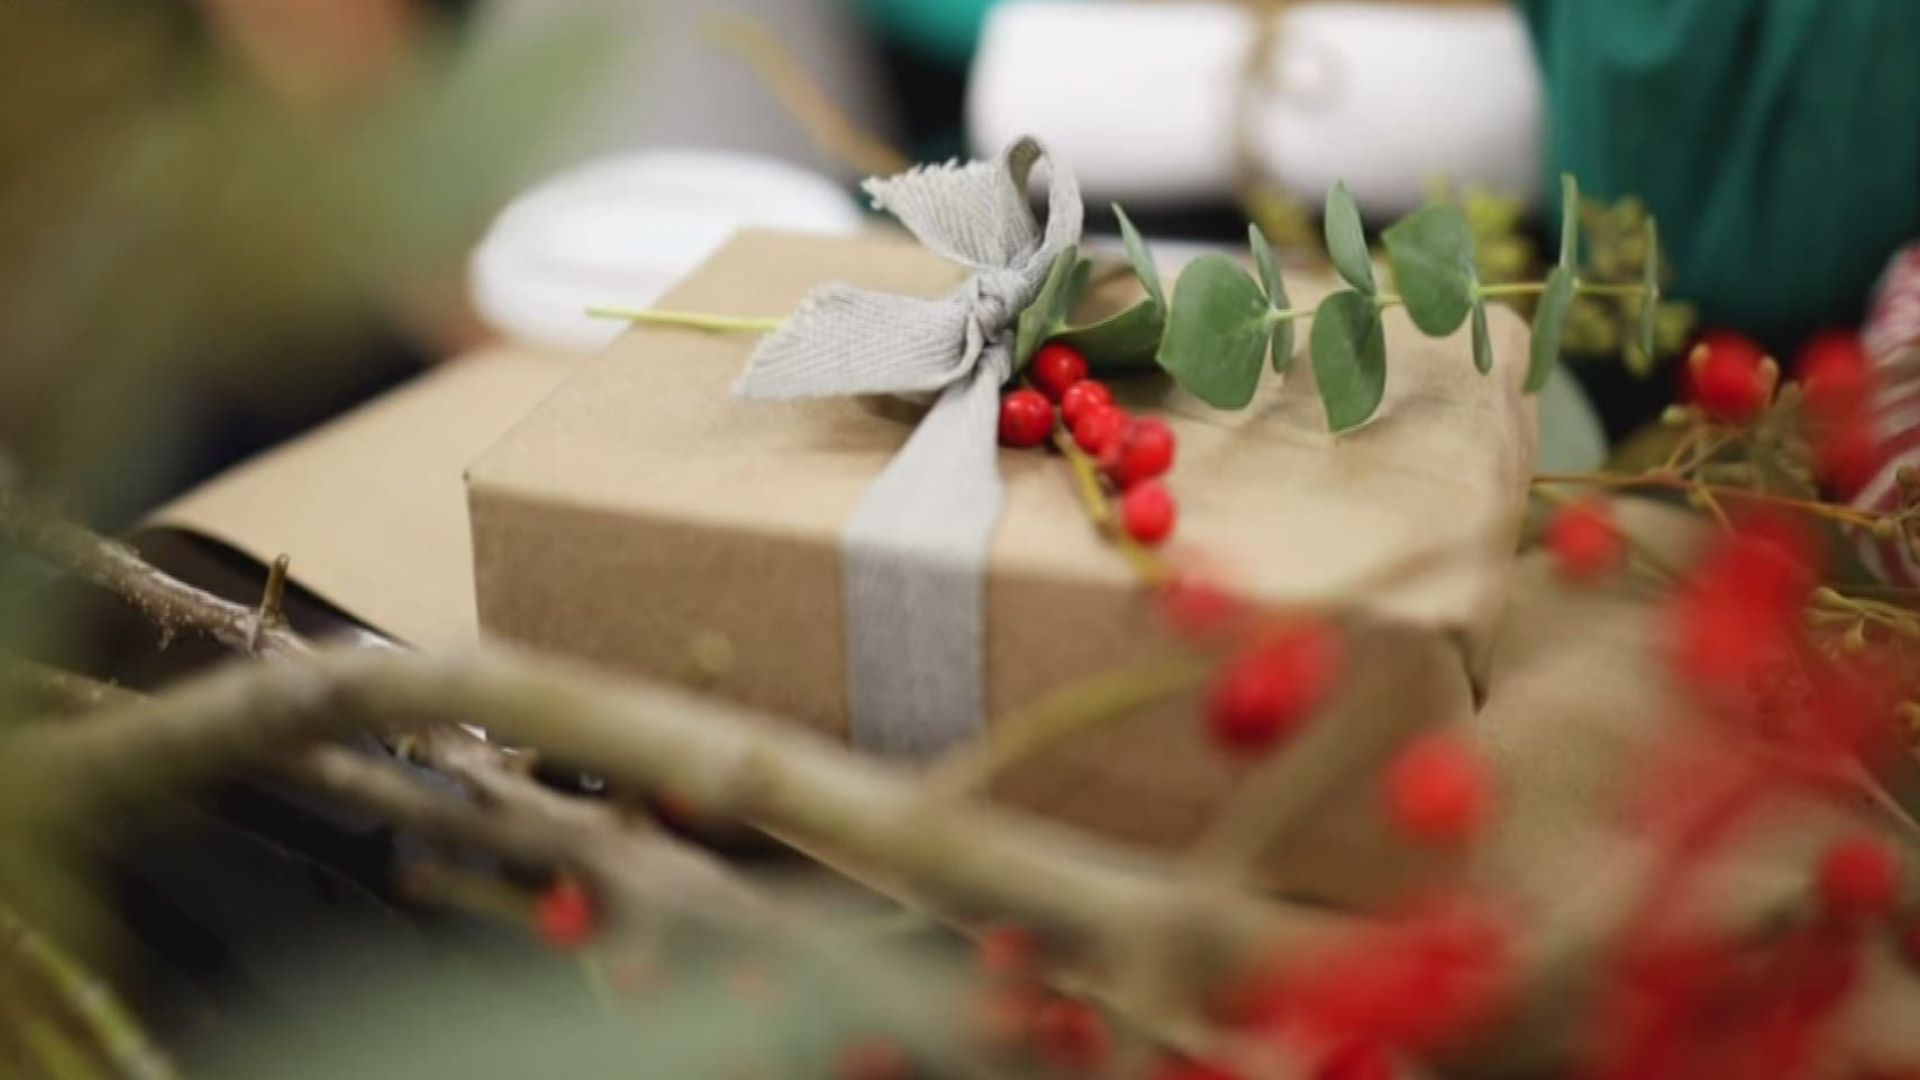 Here are some ways to wrap all your Christmas gifts without producing waste.